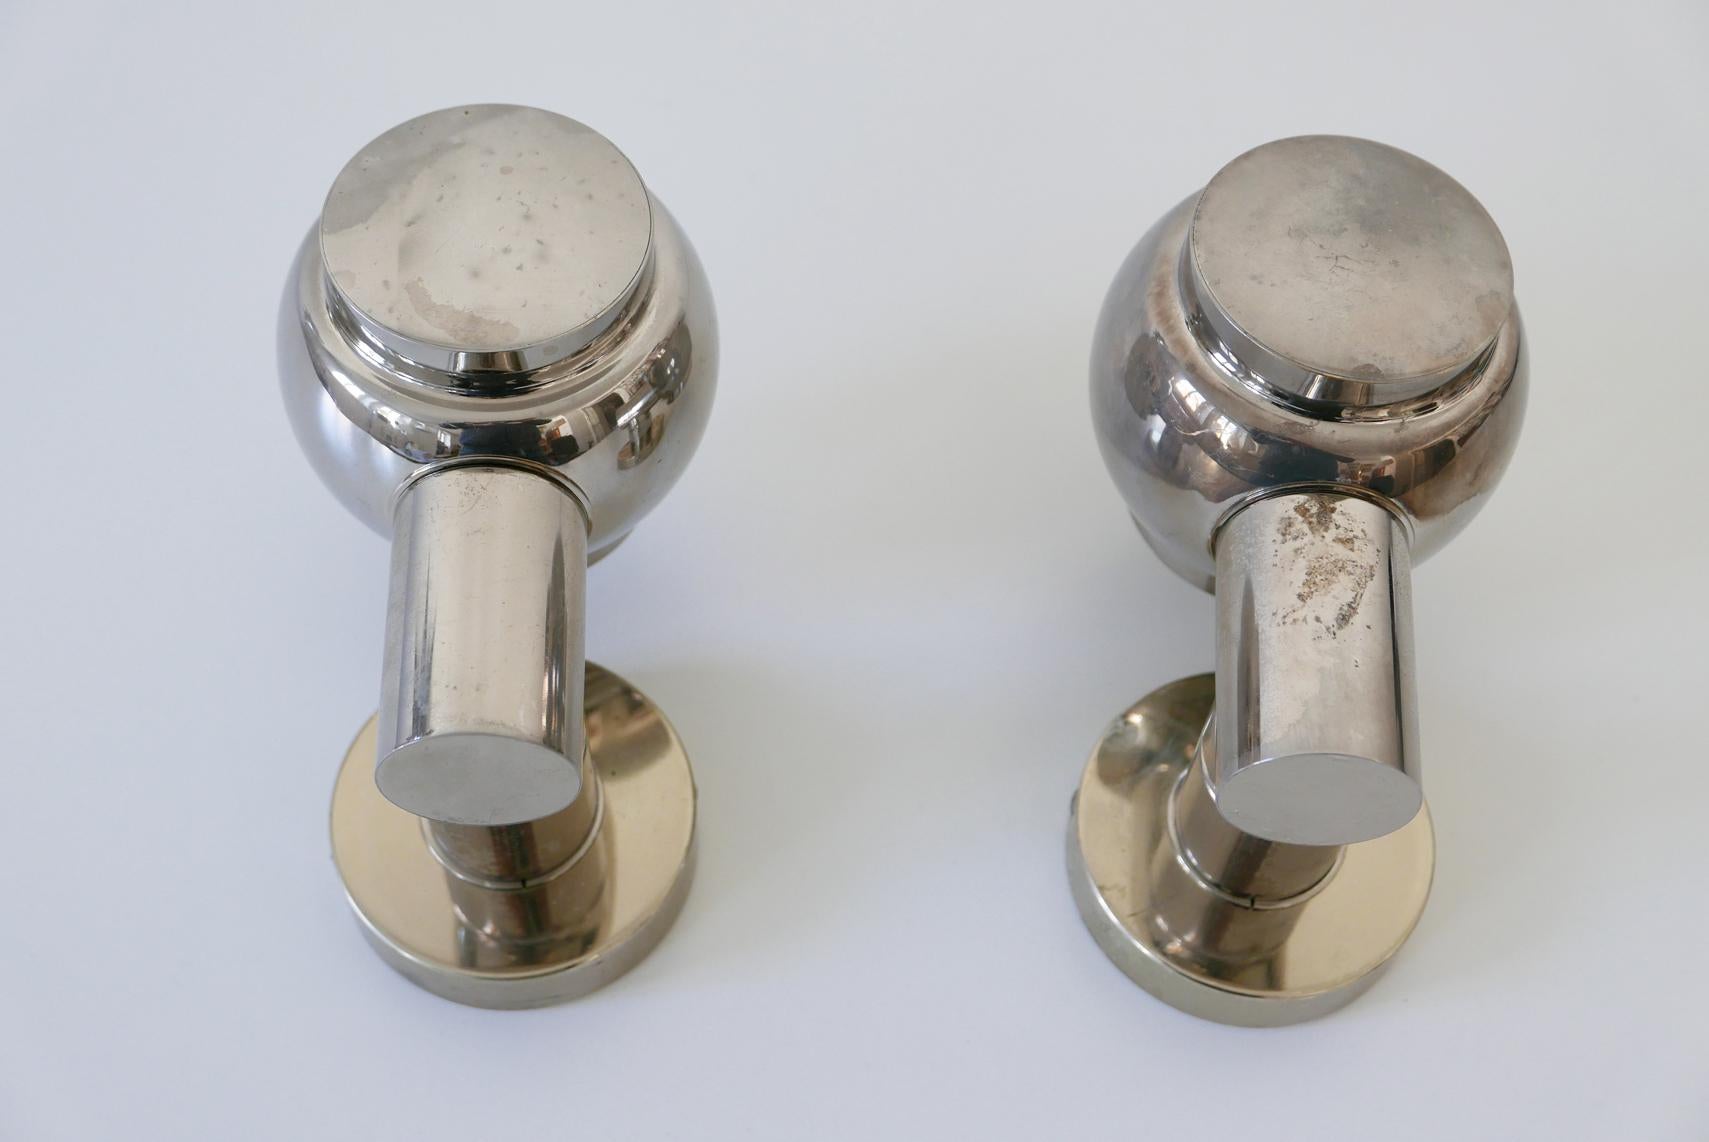 Set of Two Mid-Century Modern Wall Lamps or Sconces, 1960s, Germany For Sale 6